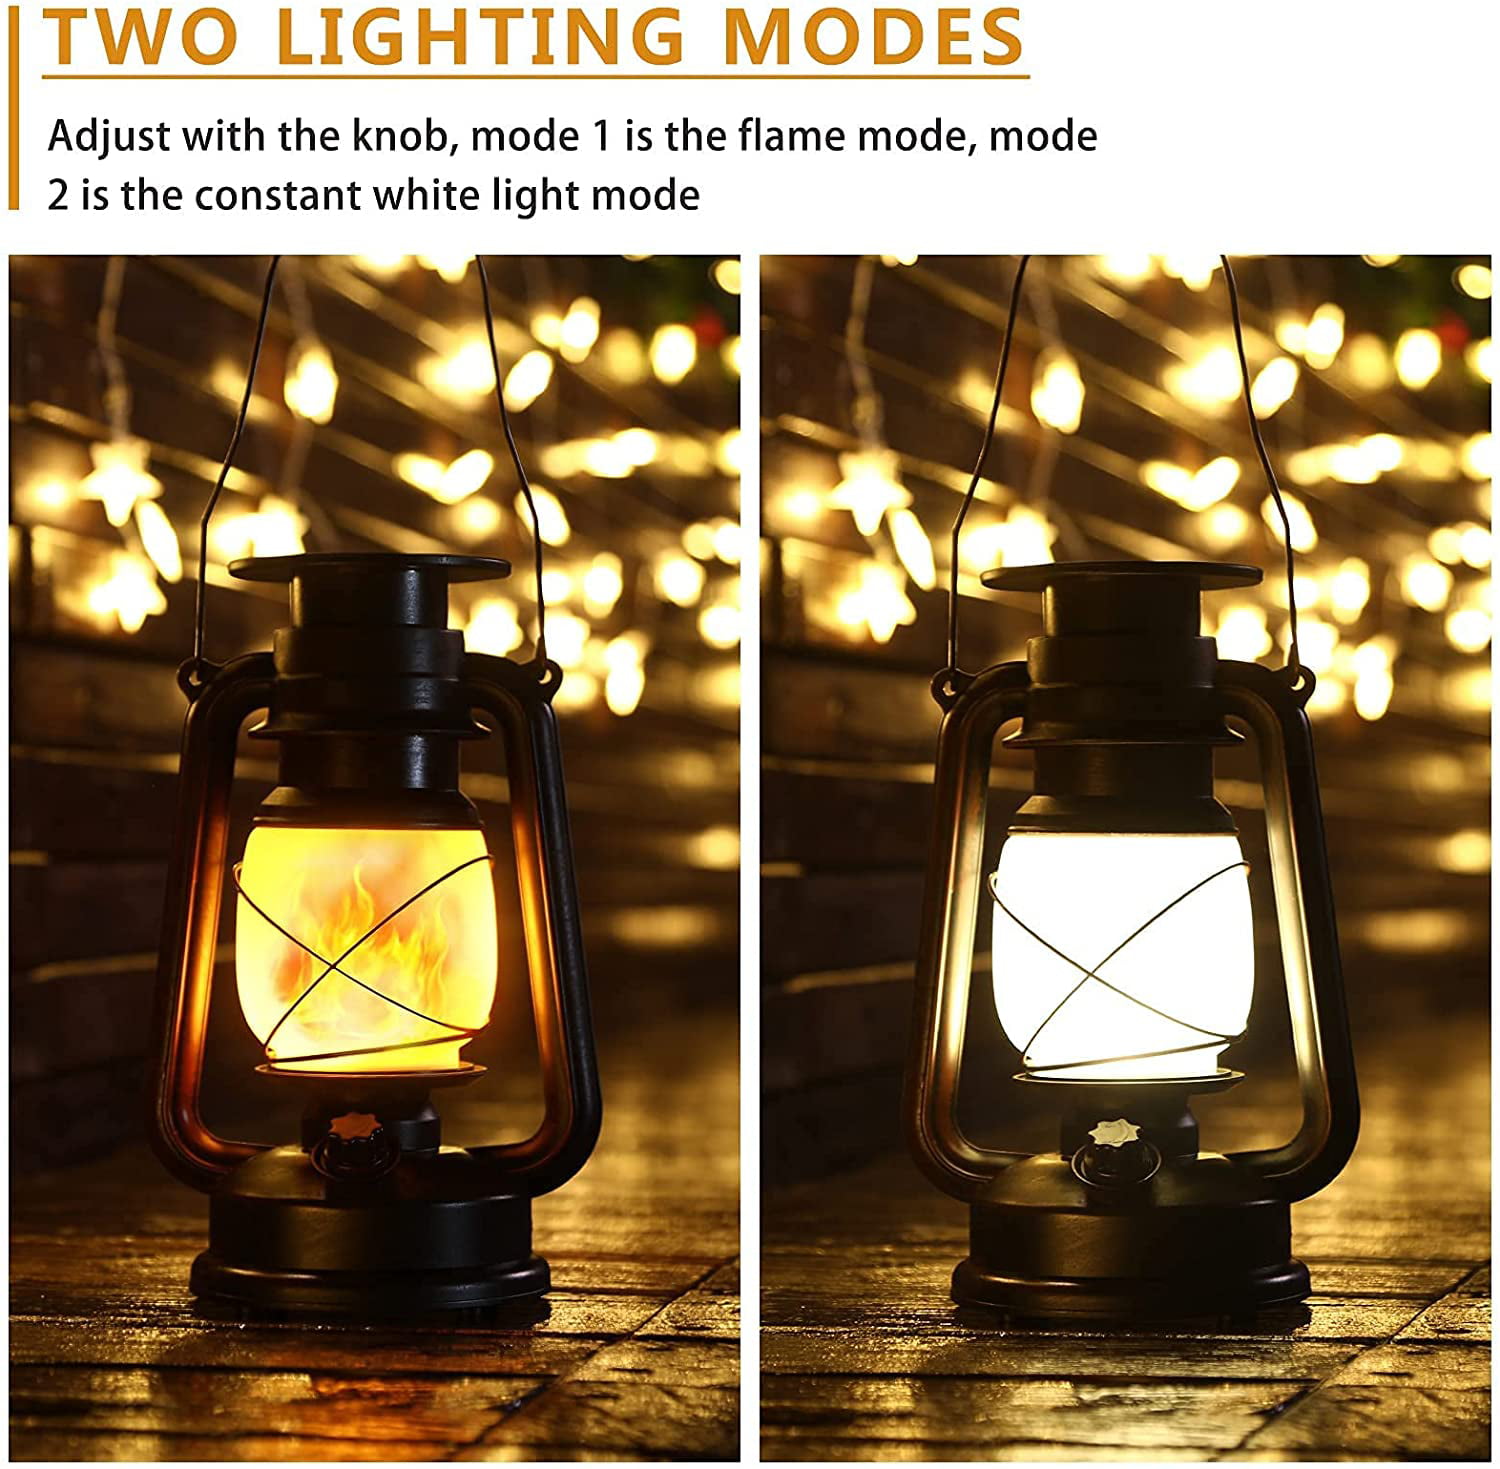  LED Vintage Lantern Battery Operated Rustic Lantern Outdoor  Decoration Flickering Flame Western Lantern Hanging Lamp with Remote for  Halloween Decor, Christmas Decor, Yard Door Front Decor, 2 Pack : Tools 